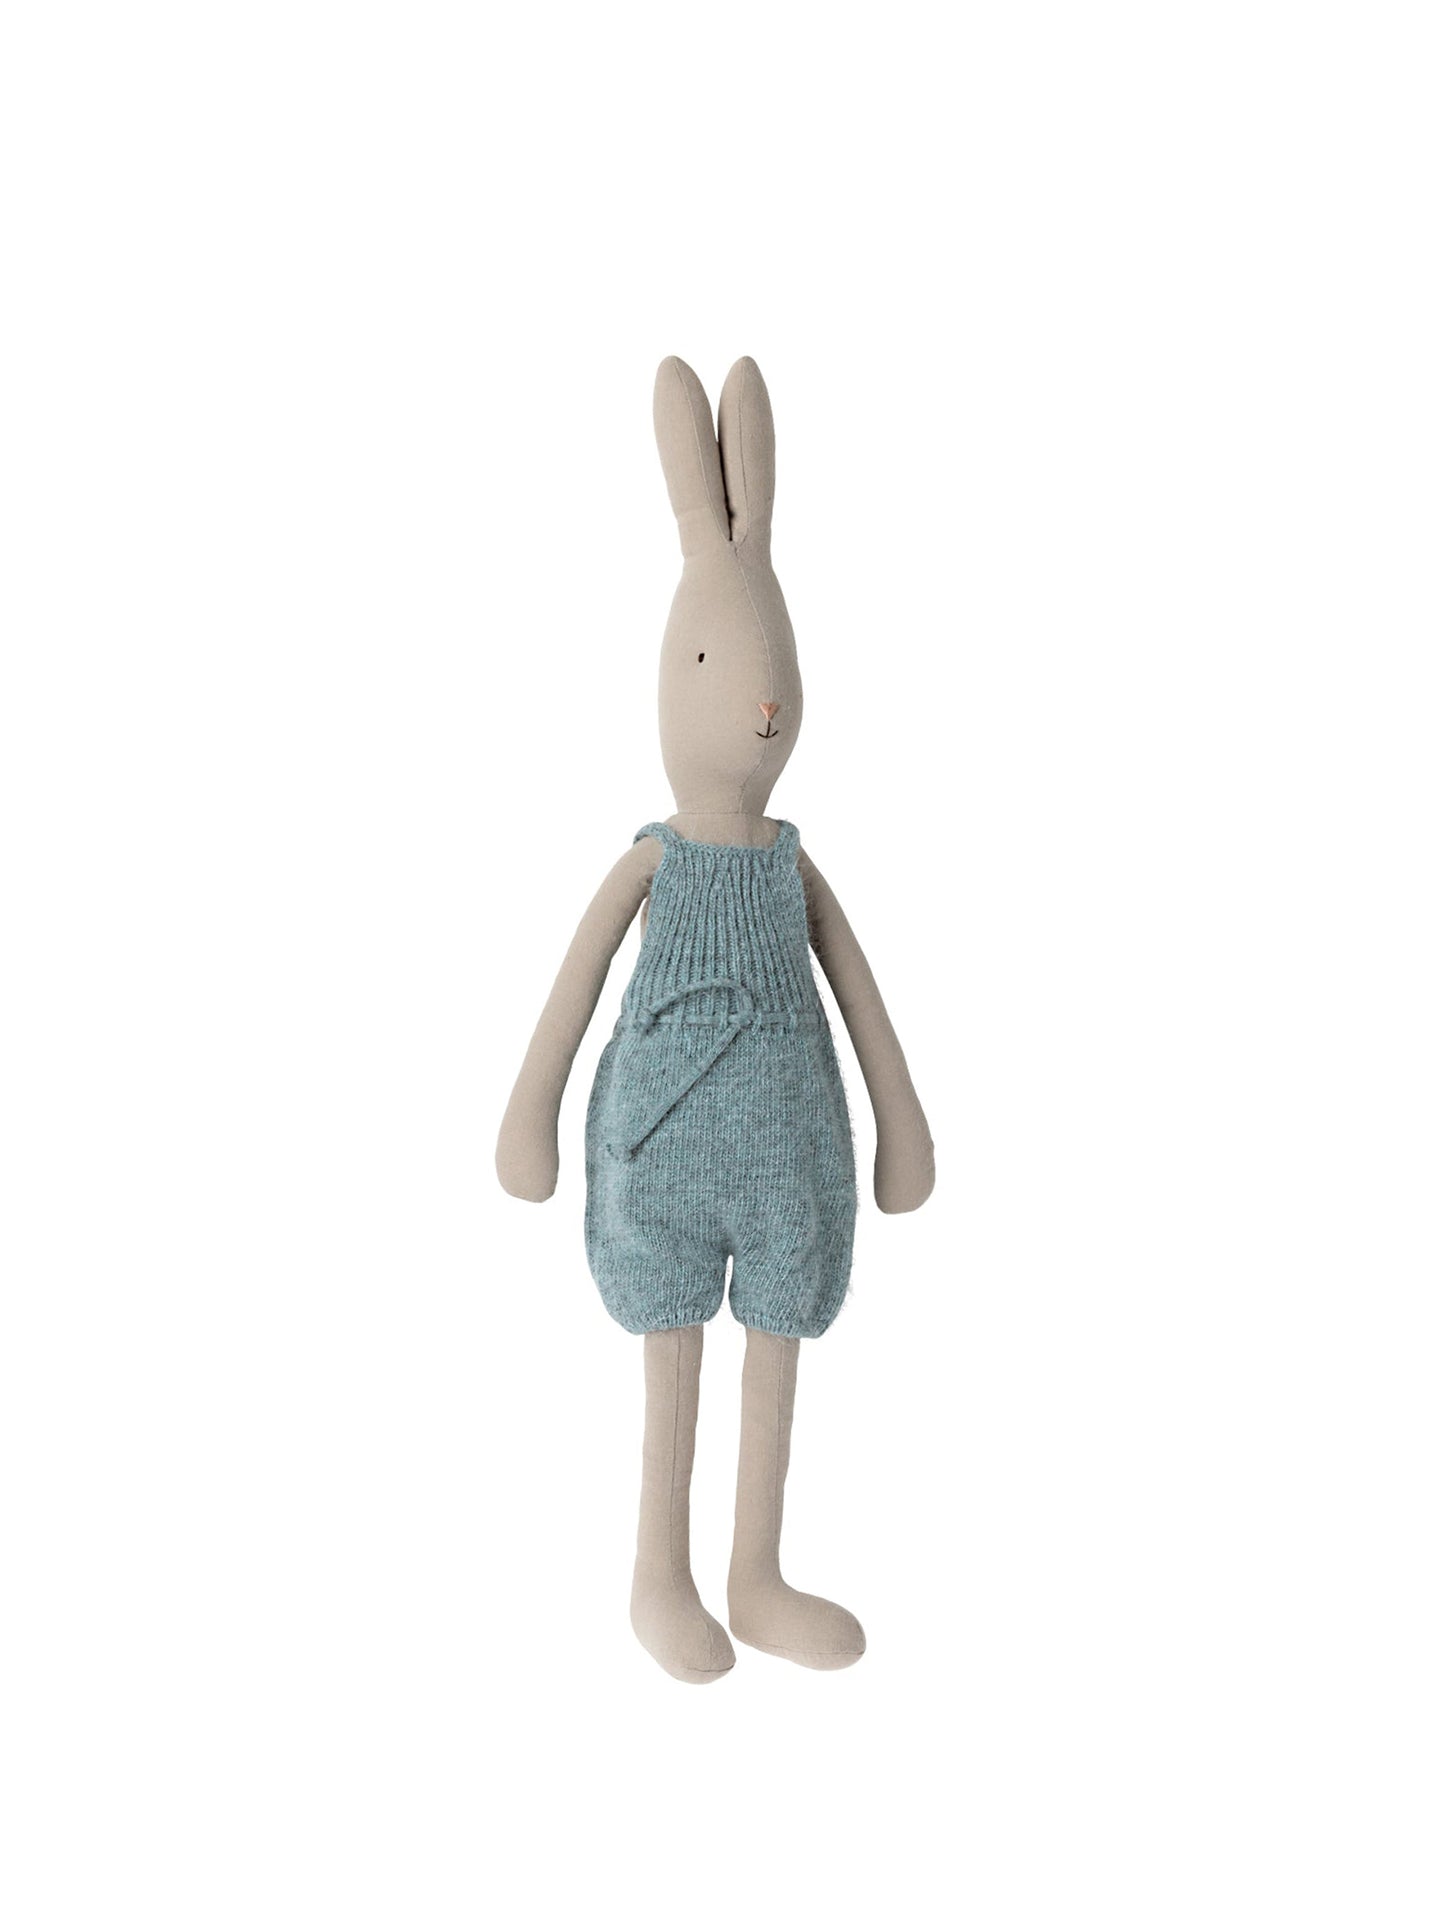 Maileg Rabbit Size 4 in Knitted Overalls Weston Table